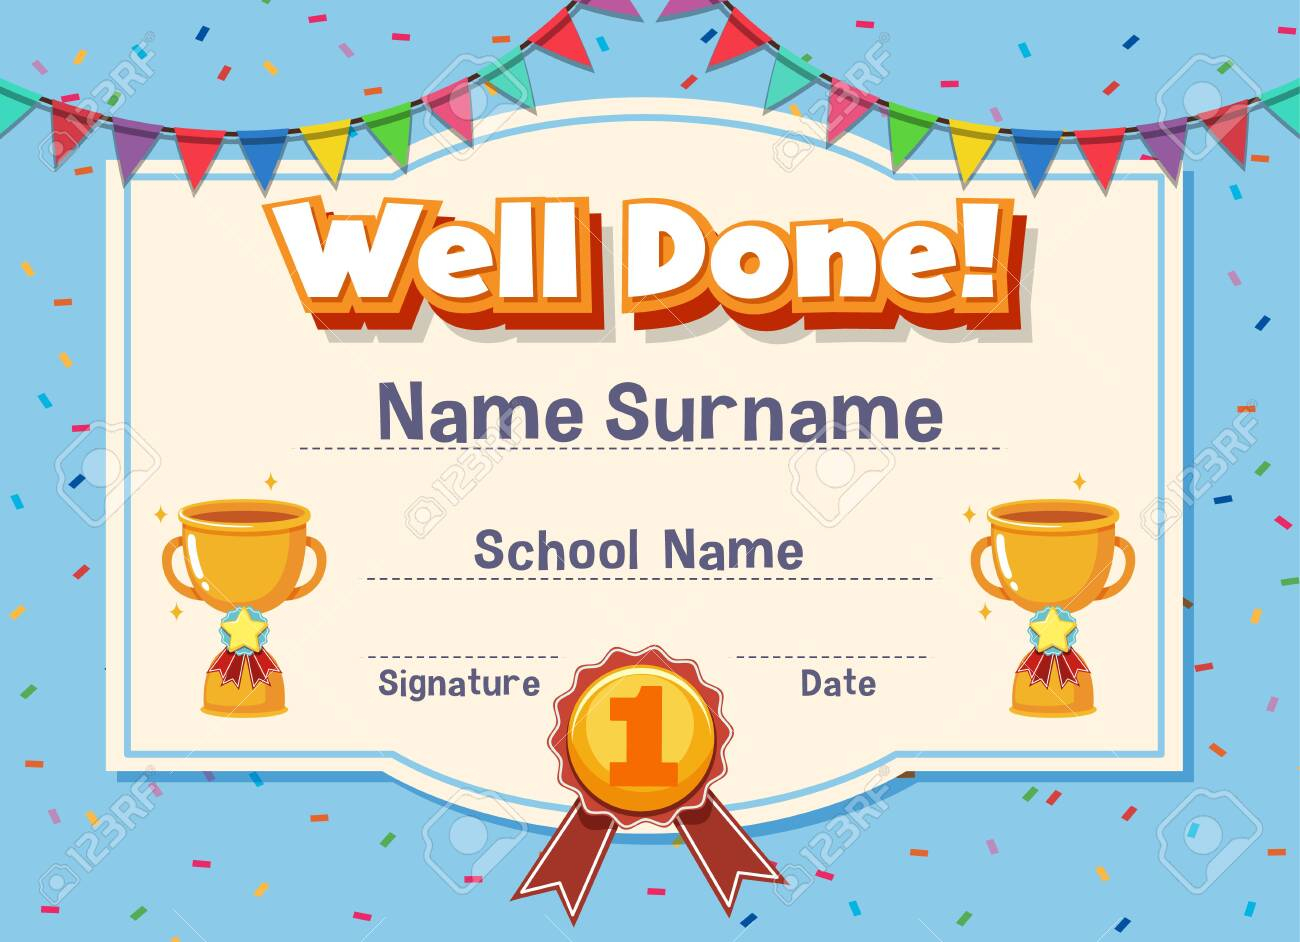 Certificate Template For Well Done With Trophy And Flags In  Intended For Walking Certificate Templates